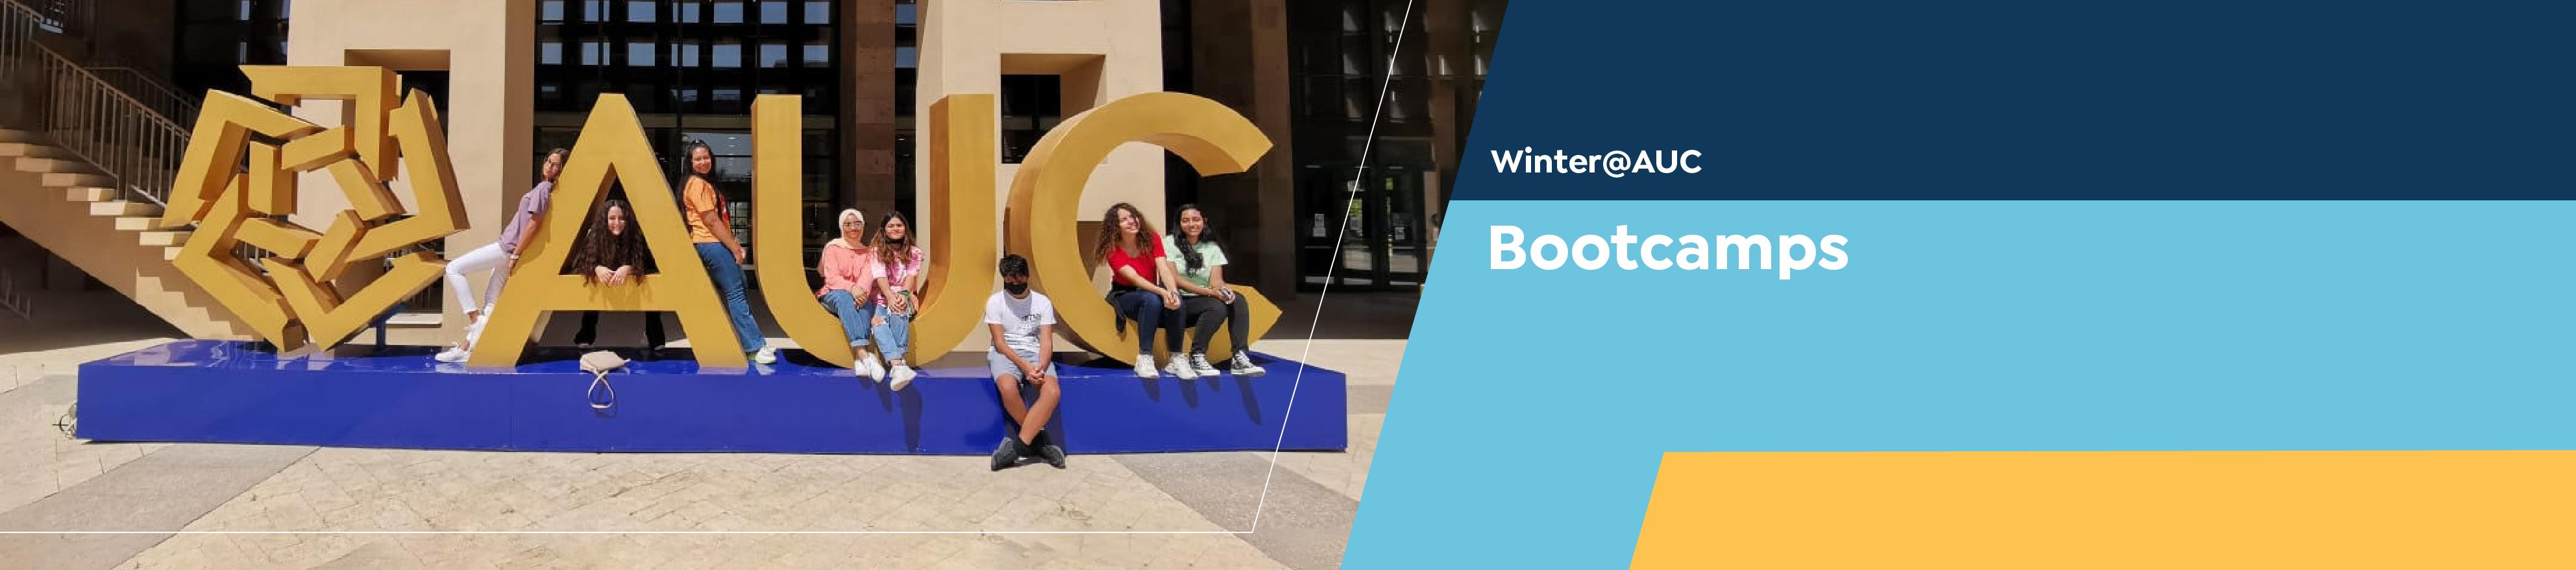 Winter@AUC Bootcamps Form